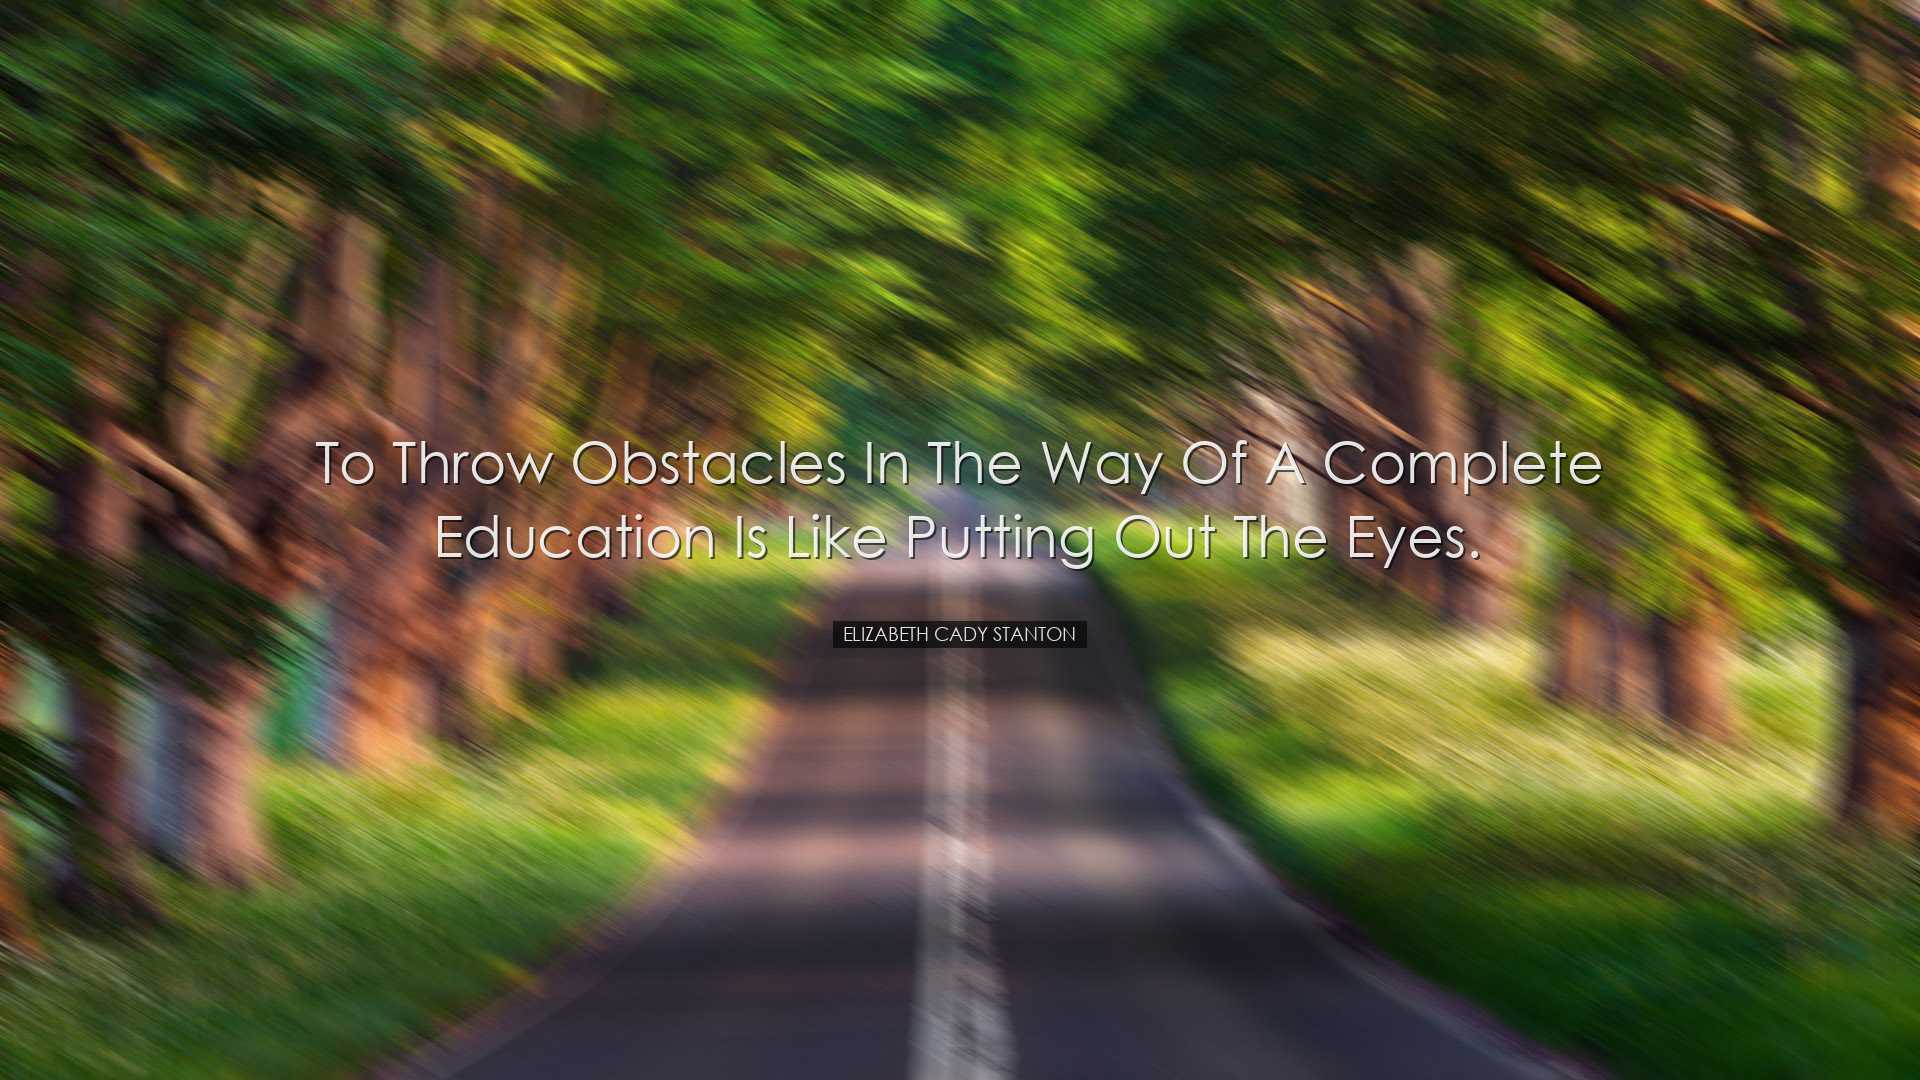 To throw obstacles in the way of a complete education is like putt